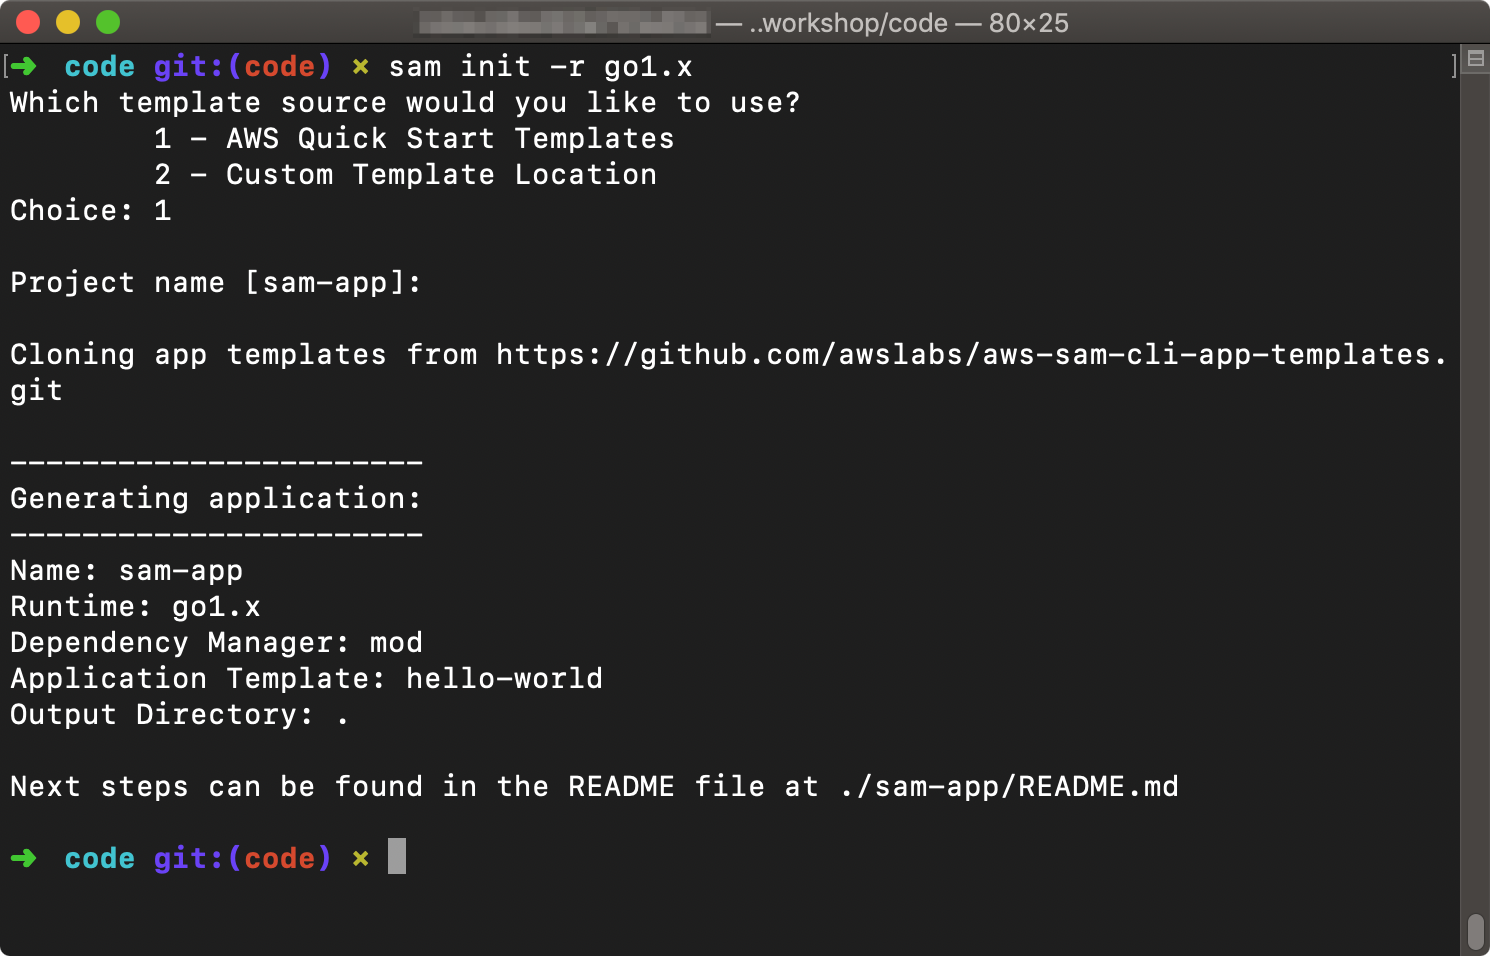 Terminal showing results of 'sam init' command.